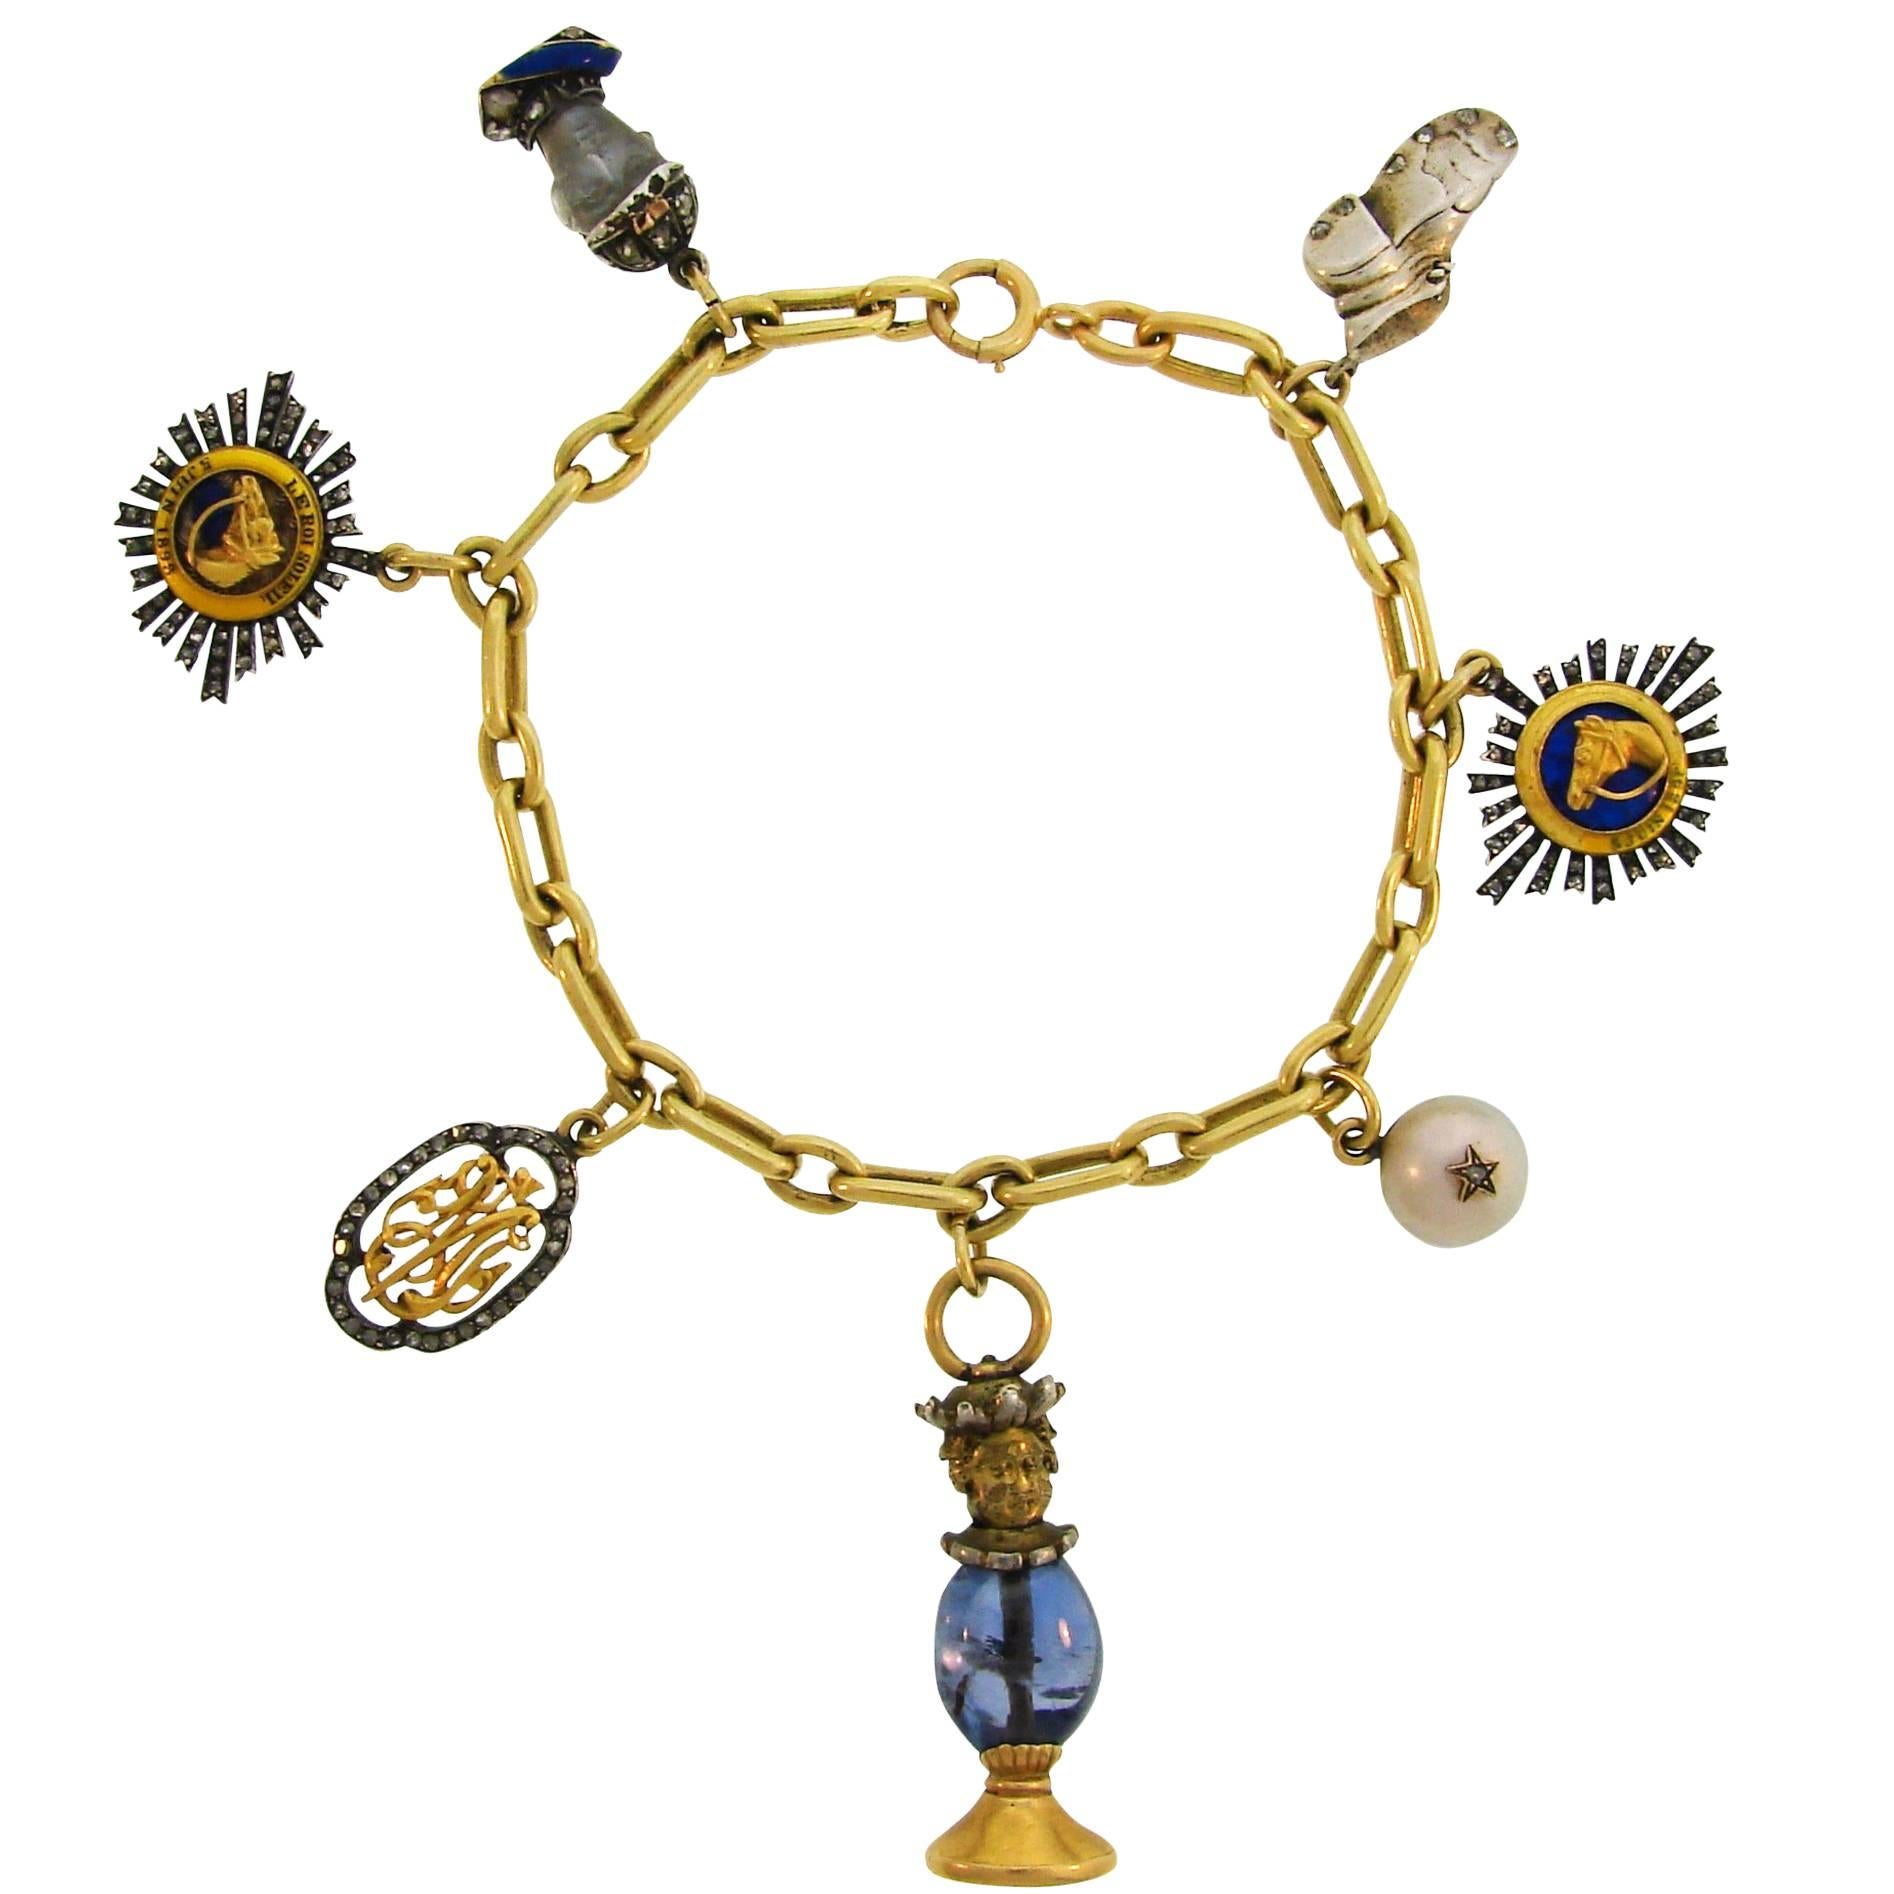 Amazing bracelet with unique beautiful charms. Lovely and wearable, the bracelet is definitely a conversational piece and a great addition to your jewelry collection.
The bracelet is made of 14 karat yellow gold (tested), the charms are made of